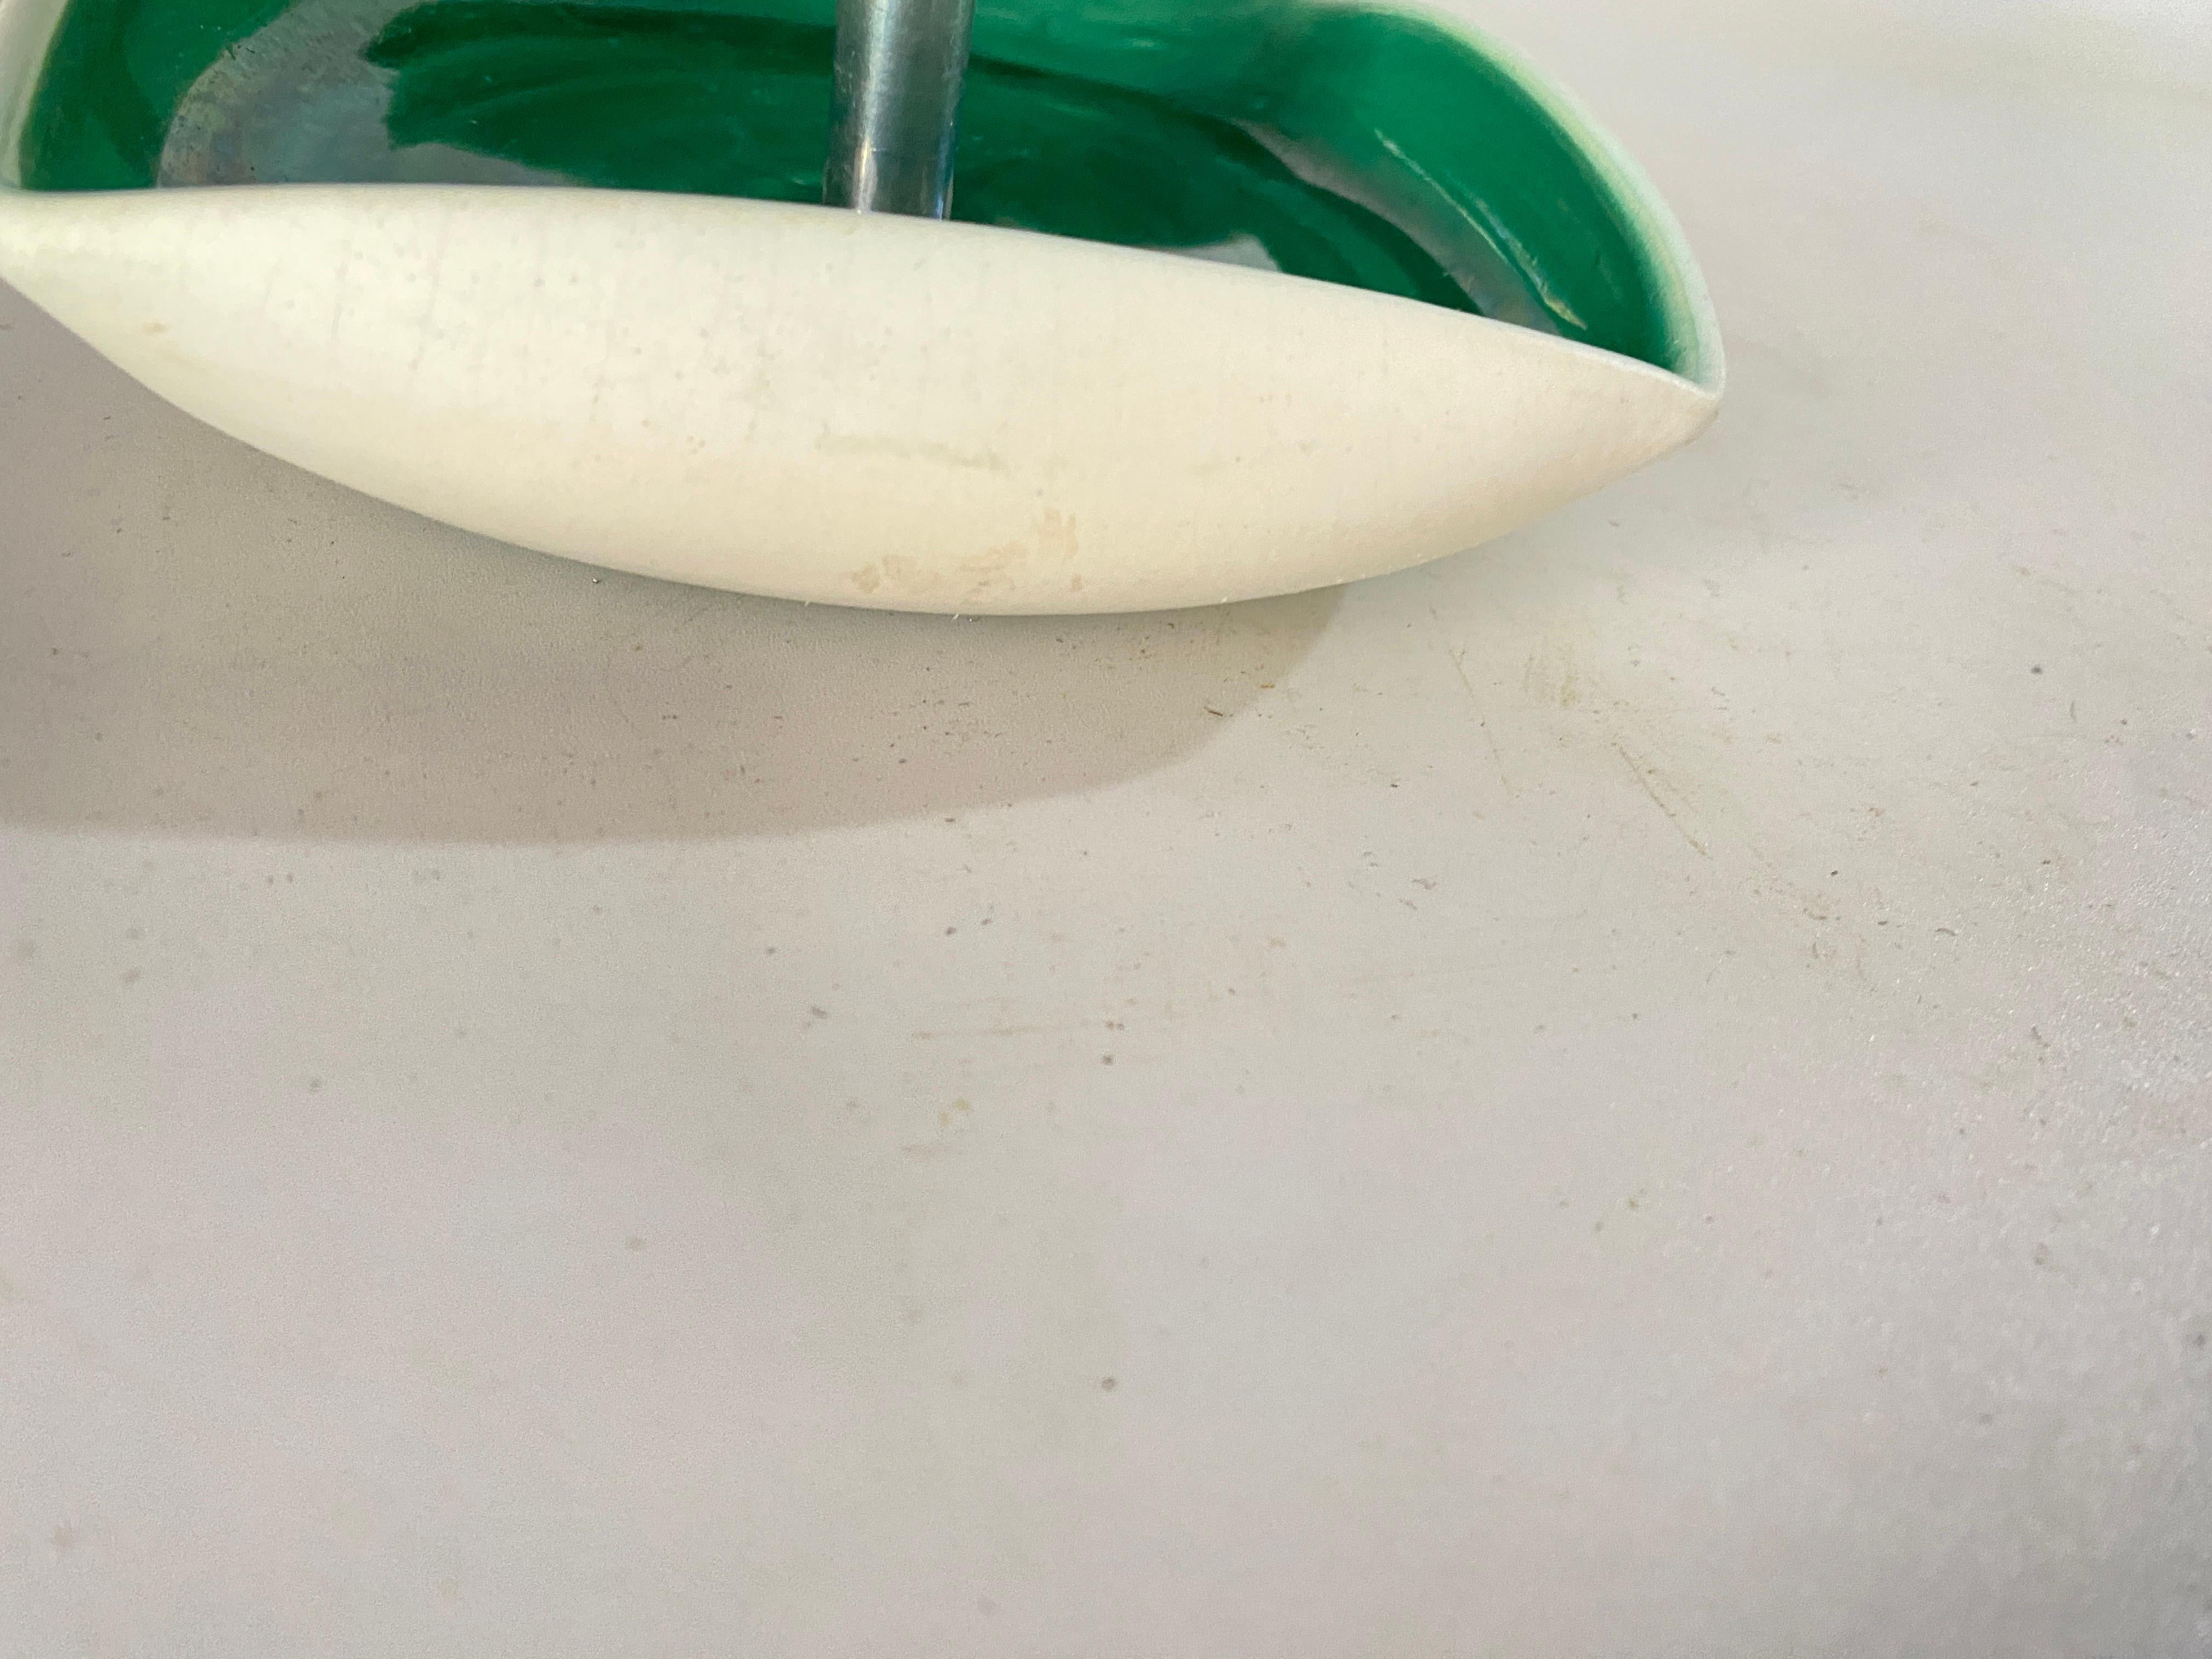 Aperitif Serving Piece, in white and Greeen color. With an metal handle.
It has been made in France circa 1970